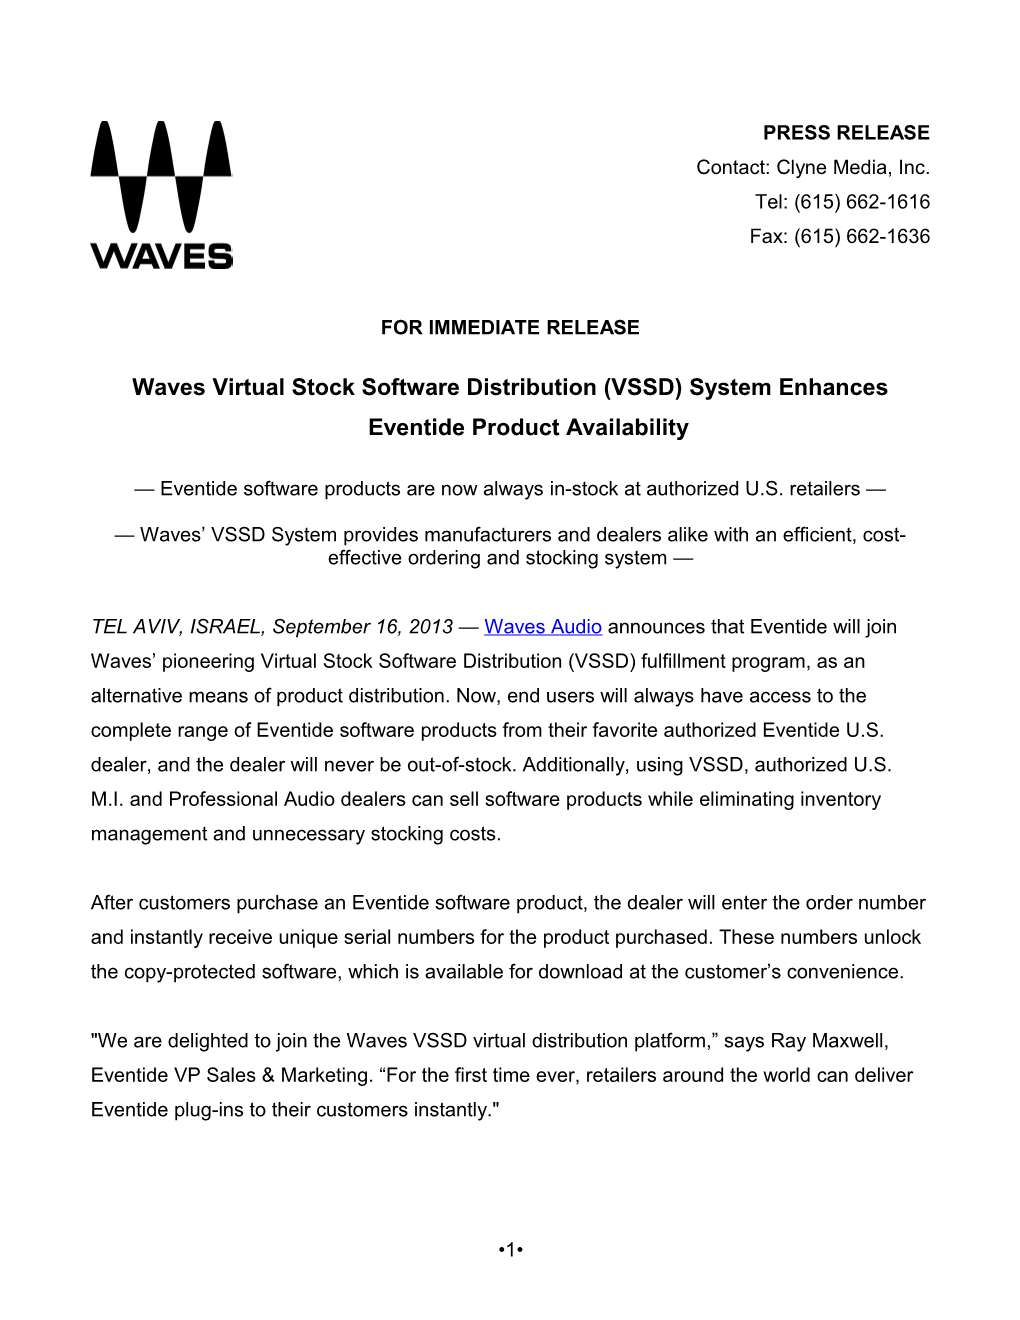 Waves Virtual Stock Software Distribution (VSSD) System Enhances Eventide Product Availability